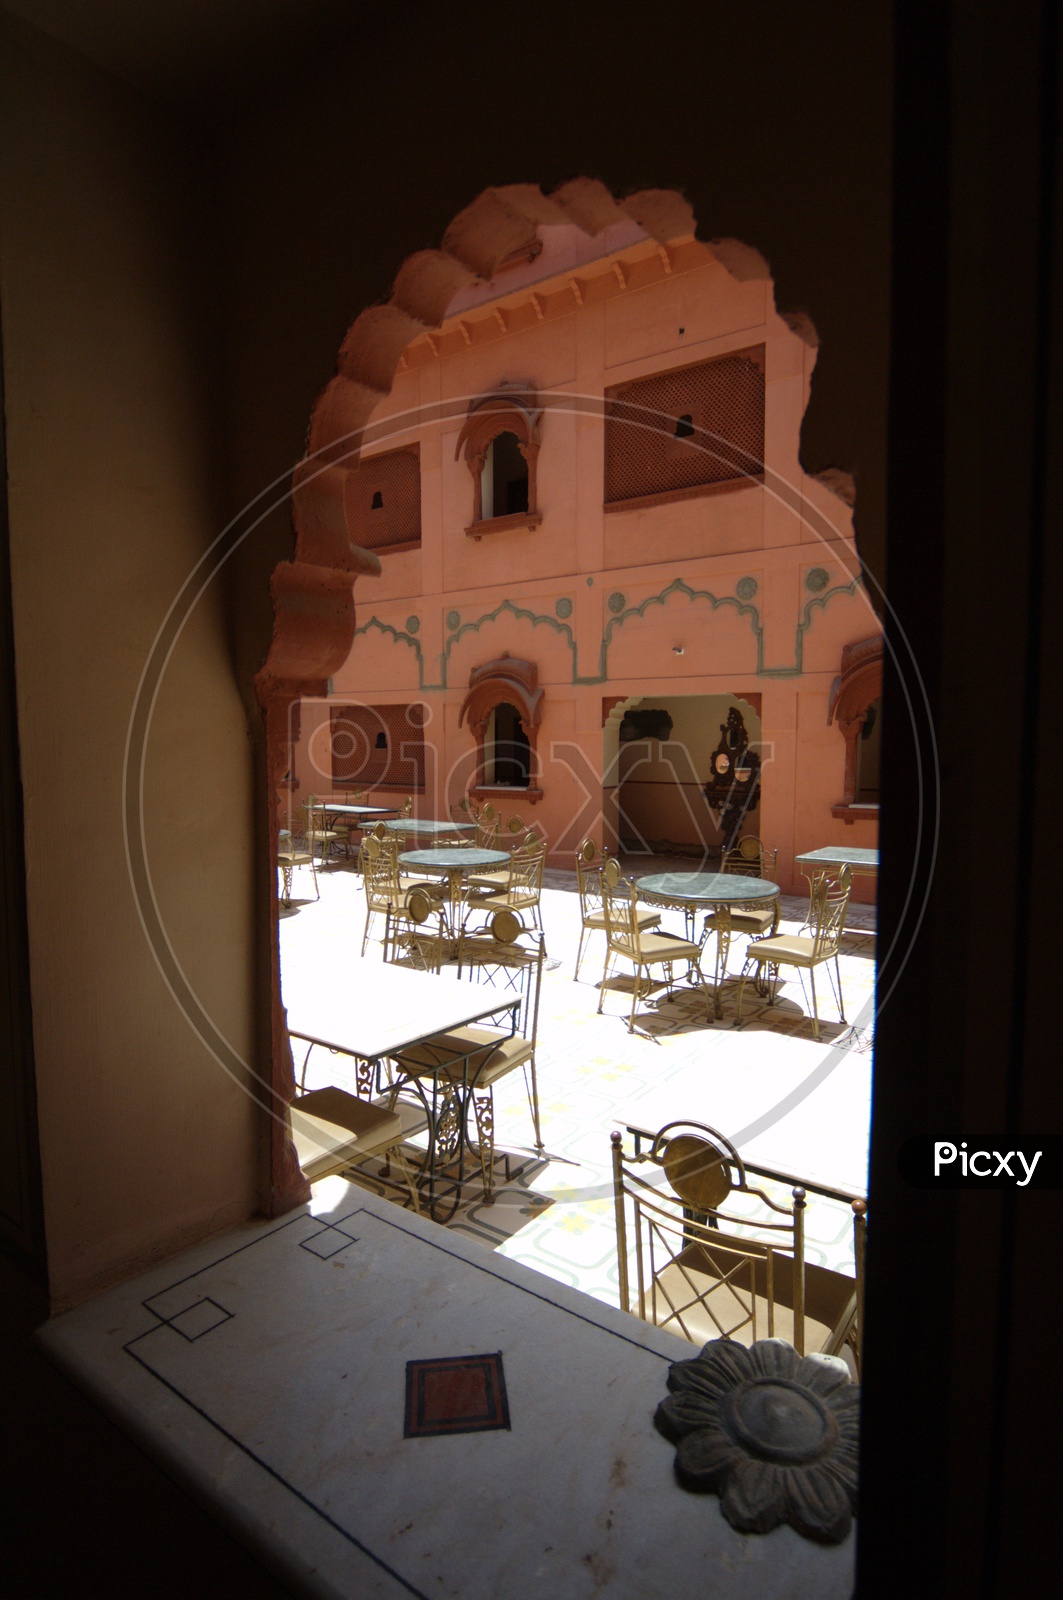 Antique tables and chairs in open area at Junagarh fort